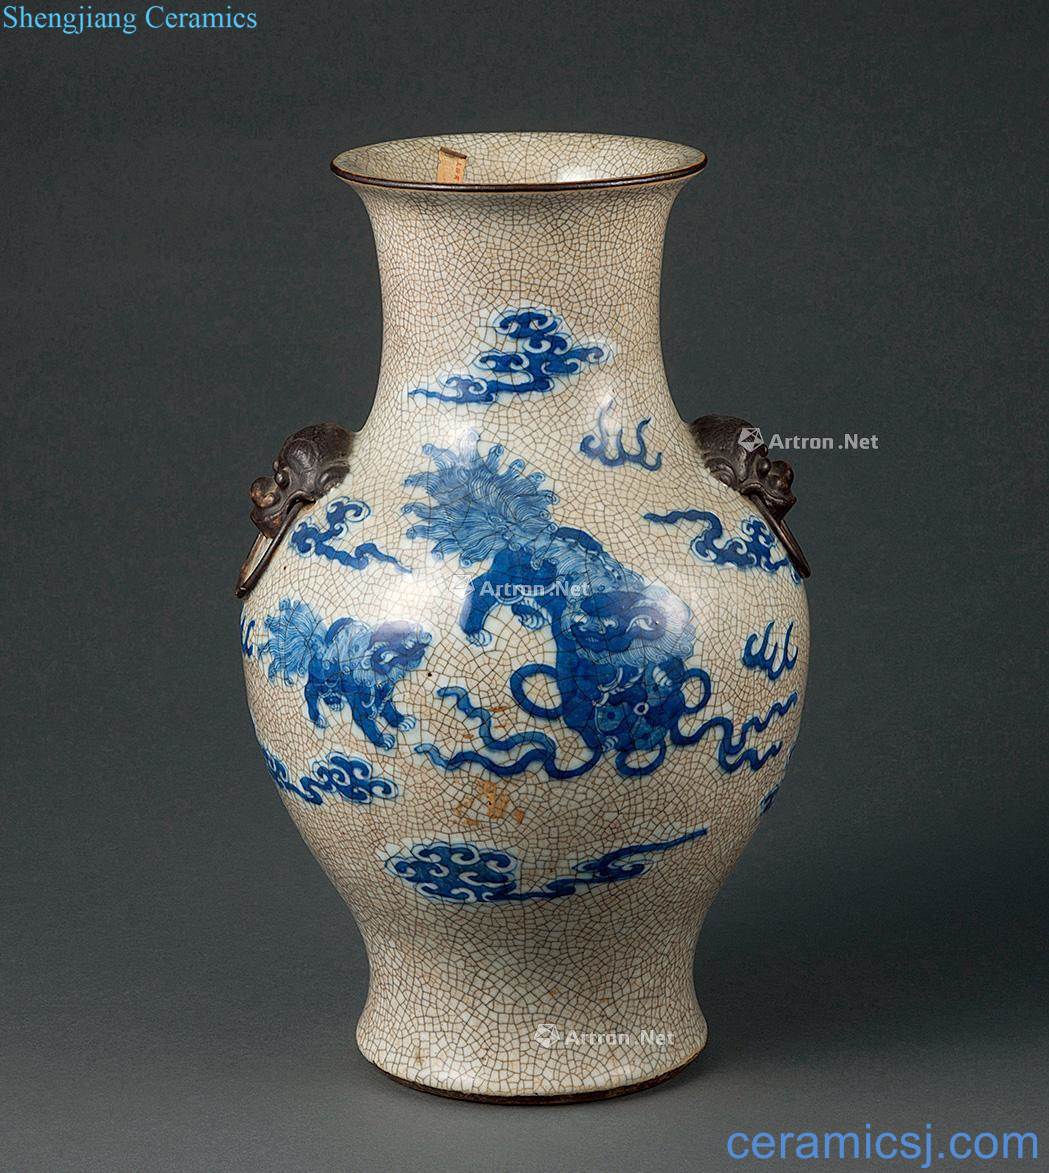 Brother qing glaze blue a surname is little vase with a stick